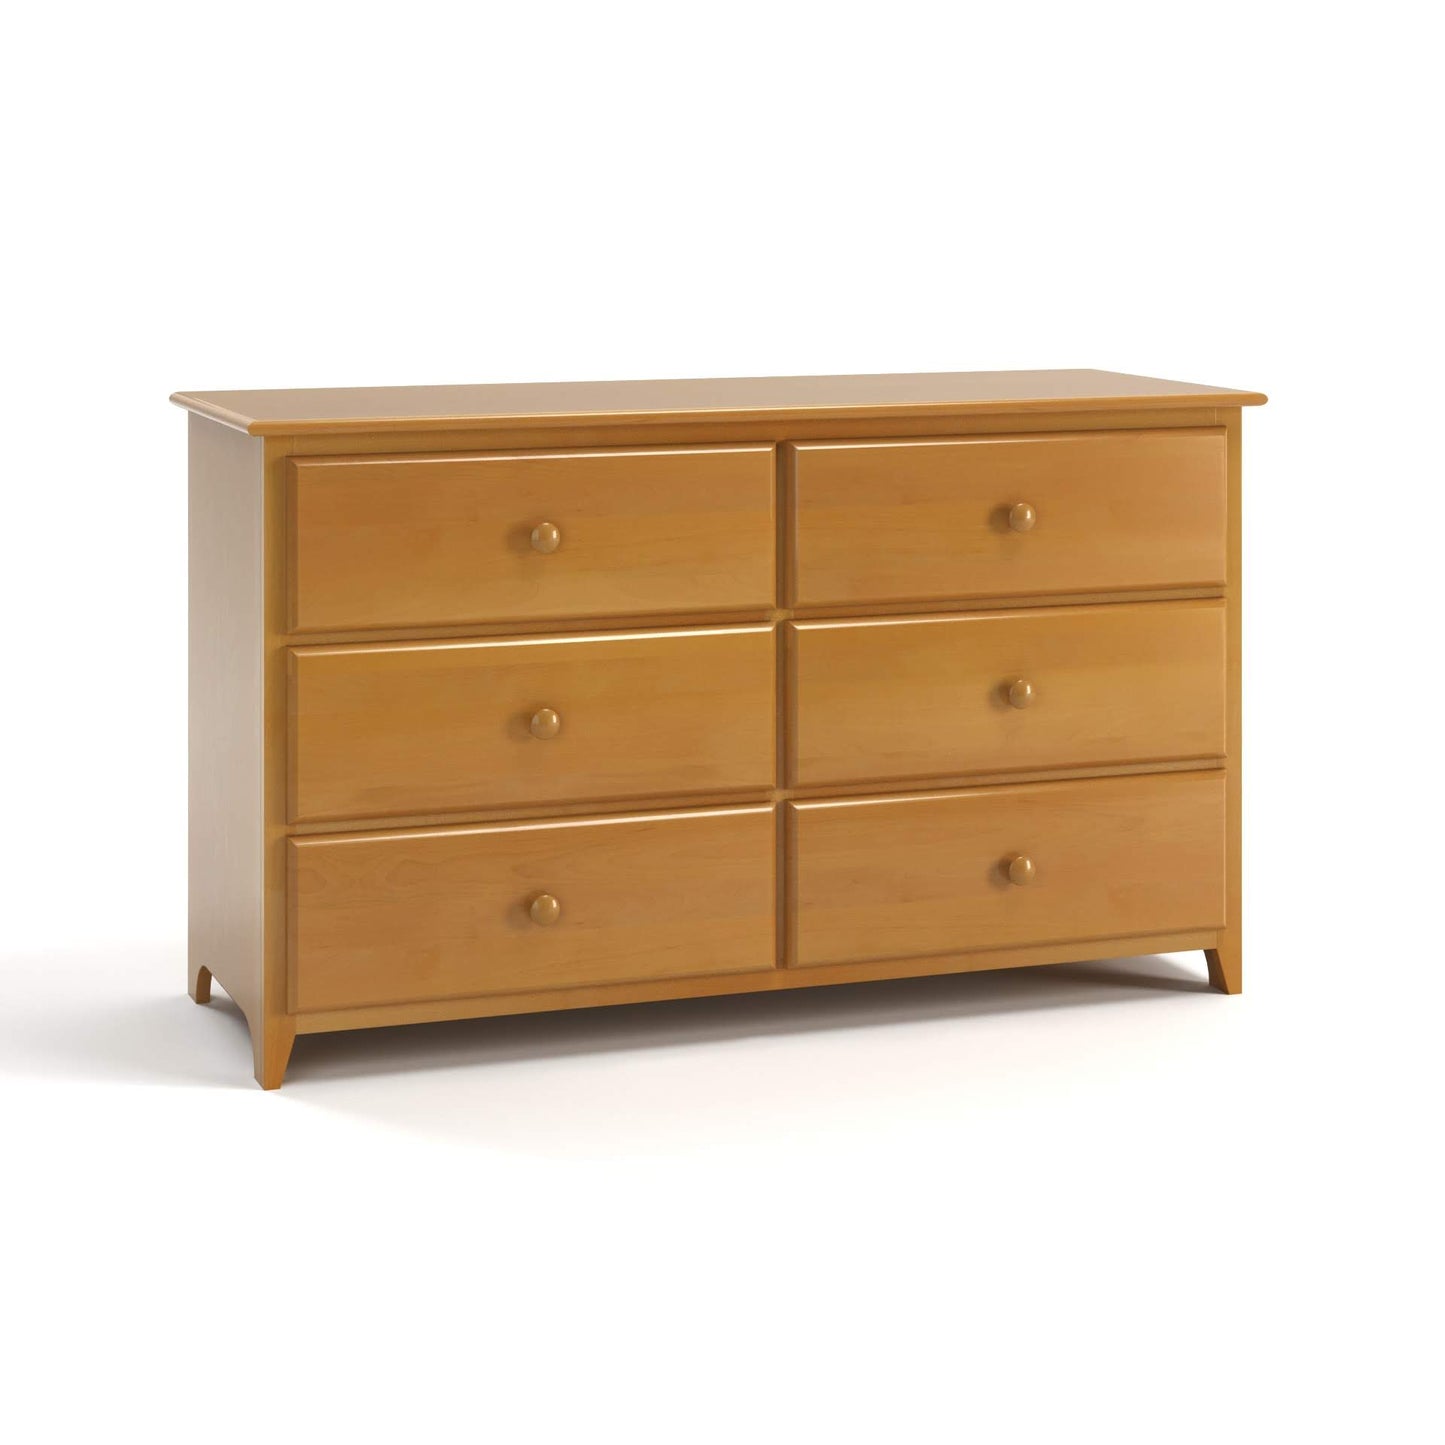 Acadia Shaker Six Drawer Dresser in Nutmeg Finish, features six large drawers for storage.